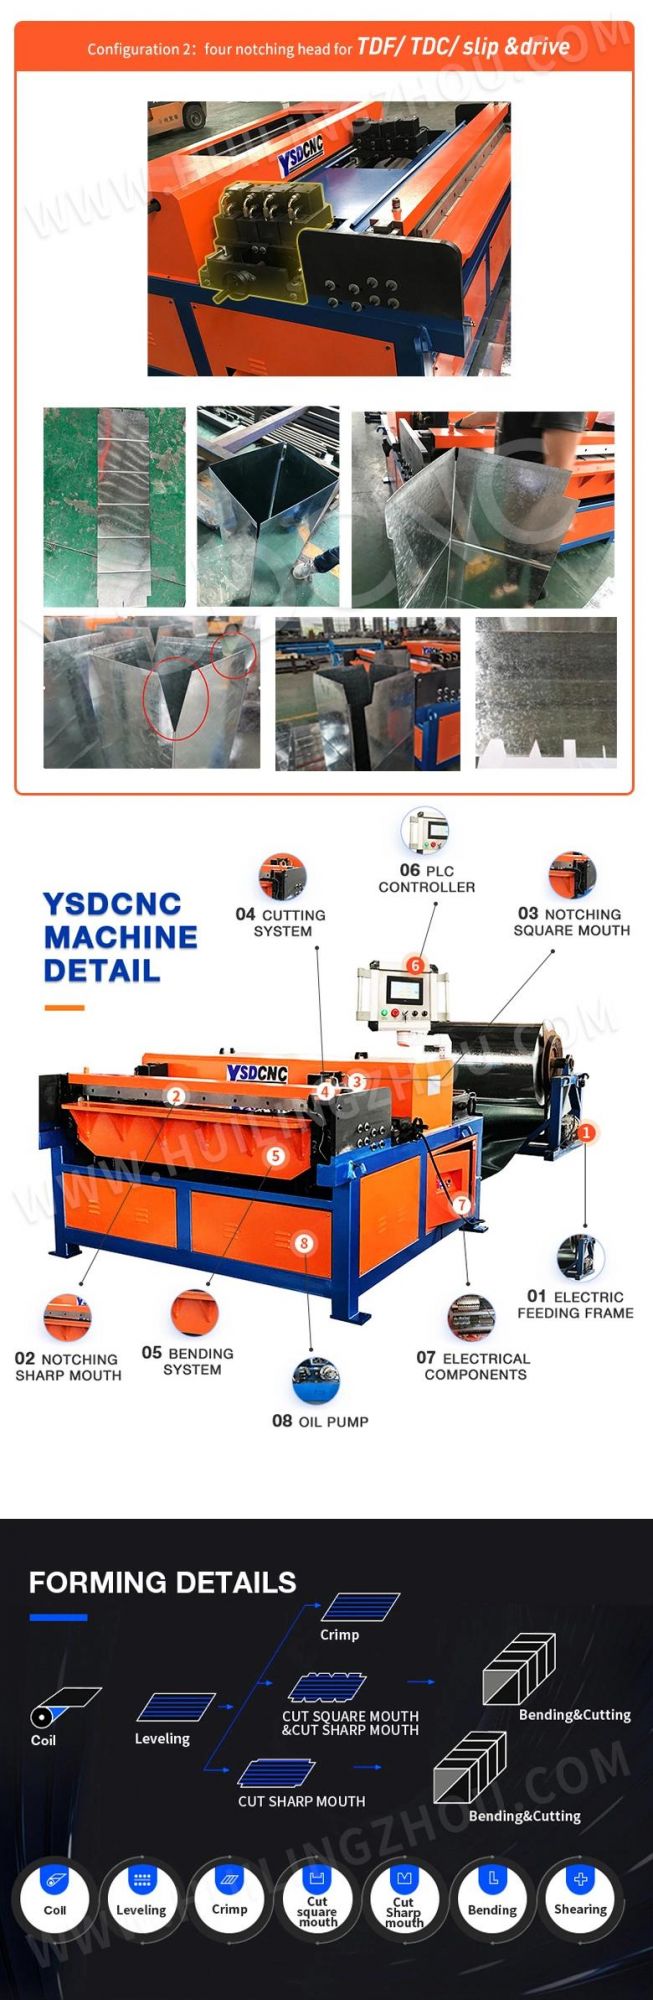 HVAC Duct Making Machine Production Auto Line 3 by Ysdcnc Manufacturer